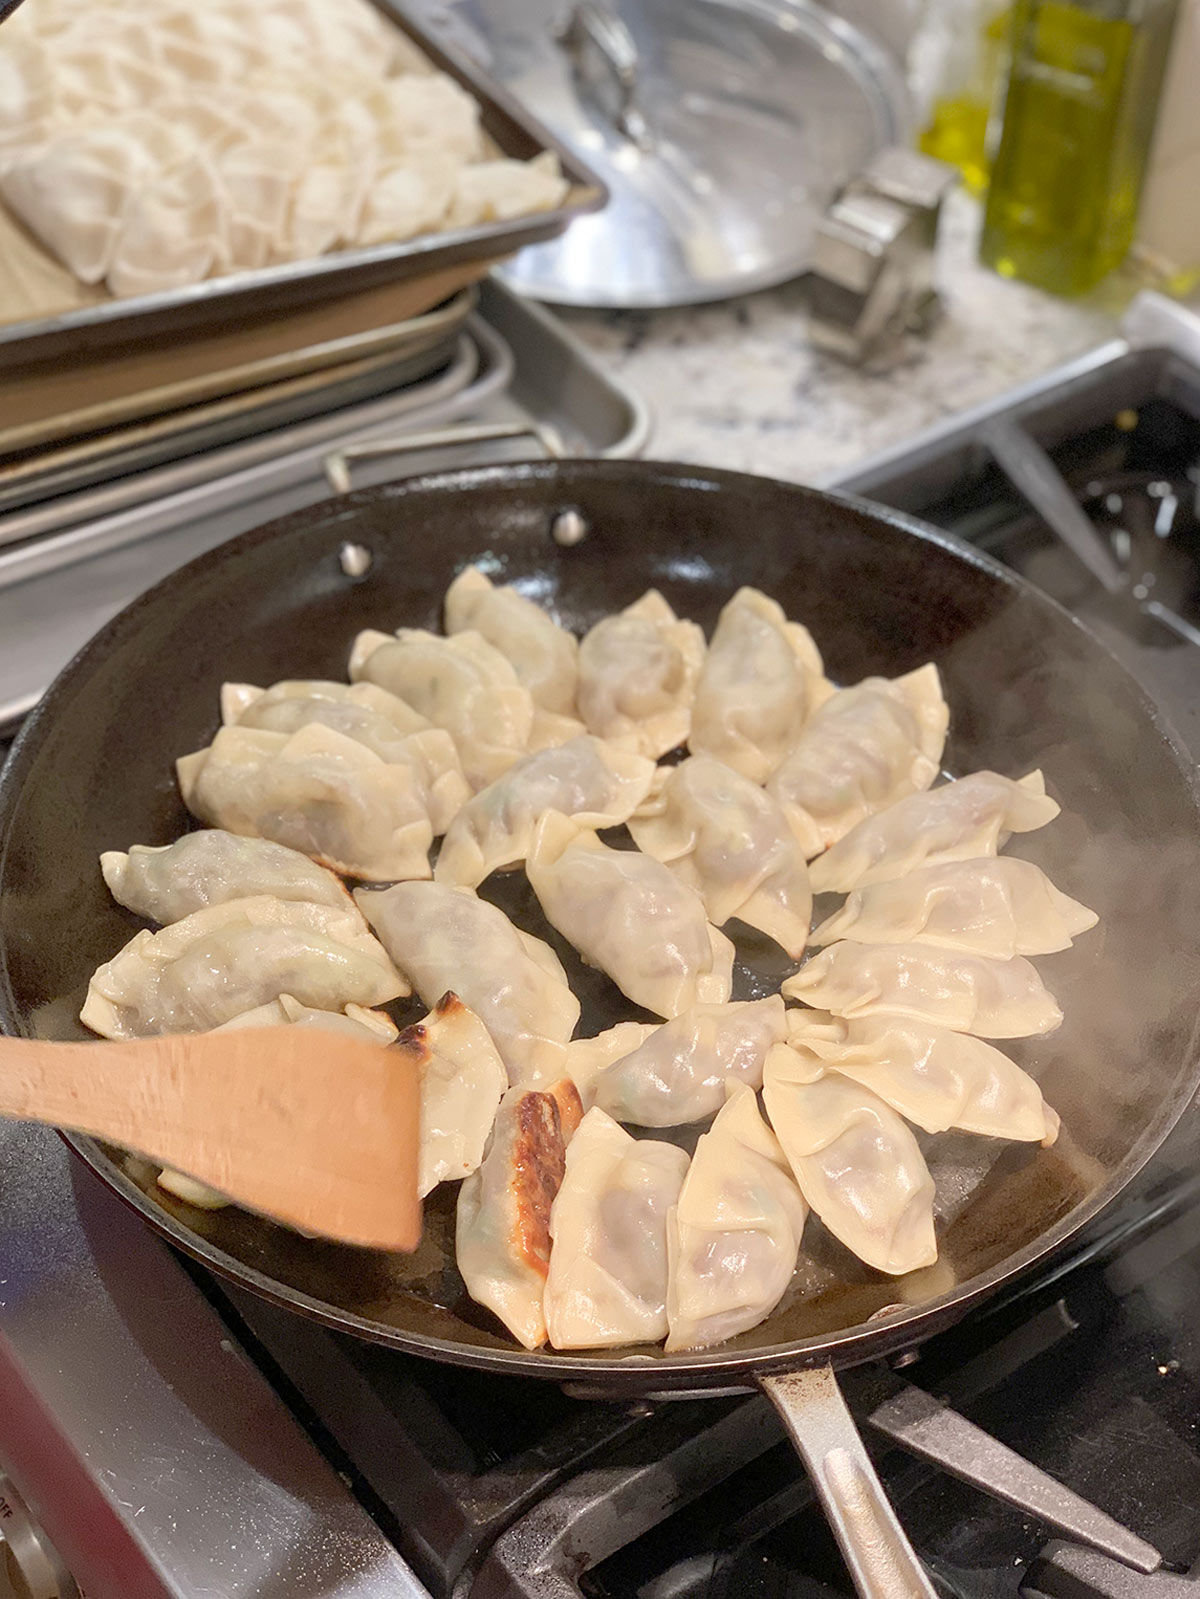 Mandu (Korean dumplings) being pan fried and showing the sear on one side of a few of them.